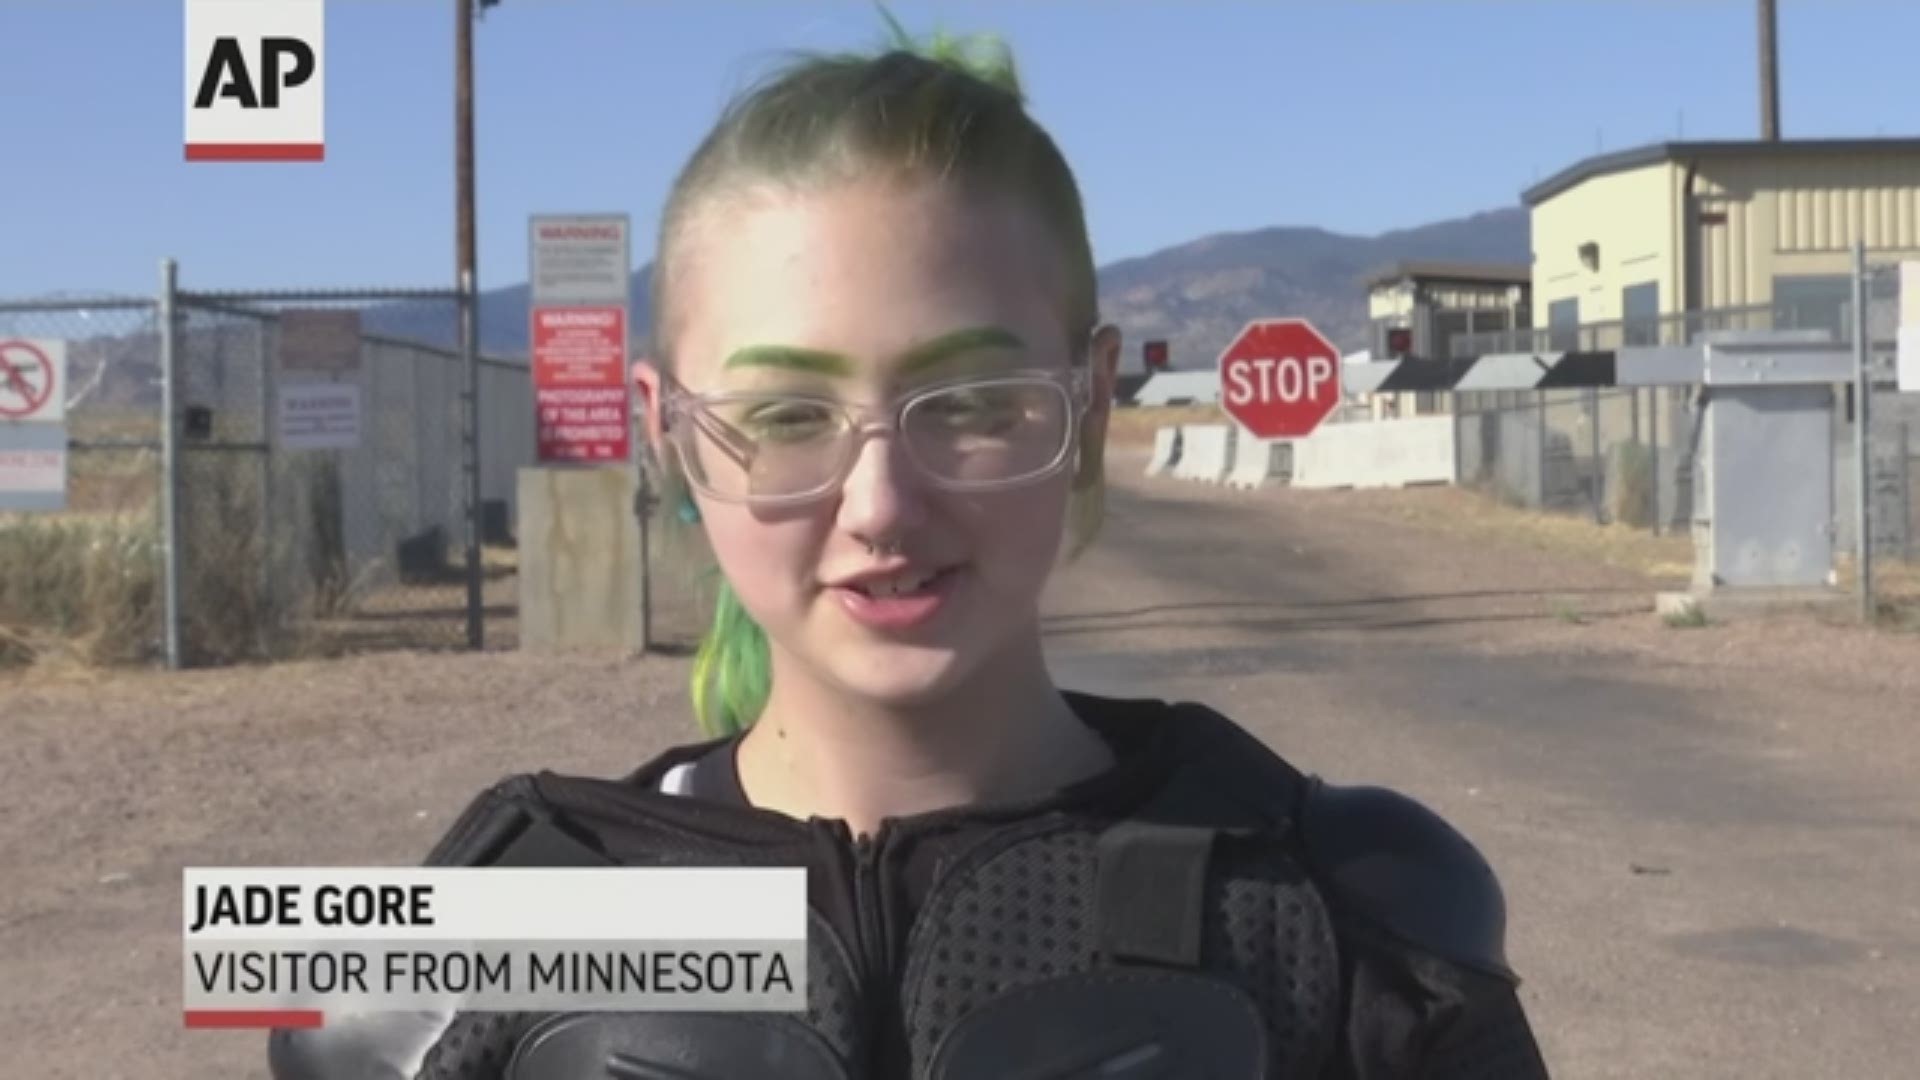 Nevada authorities say events have been peaceful at internet-inspired gatherings around Area 51. (AP)